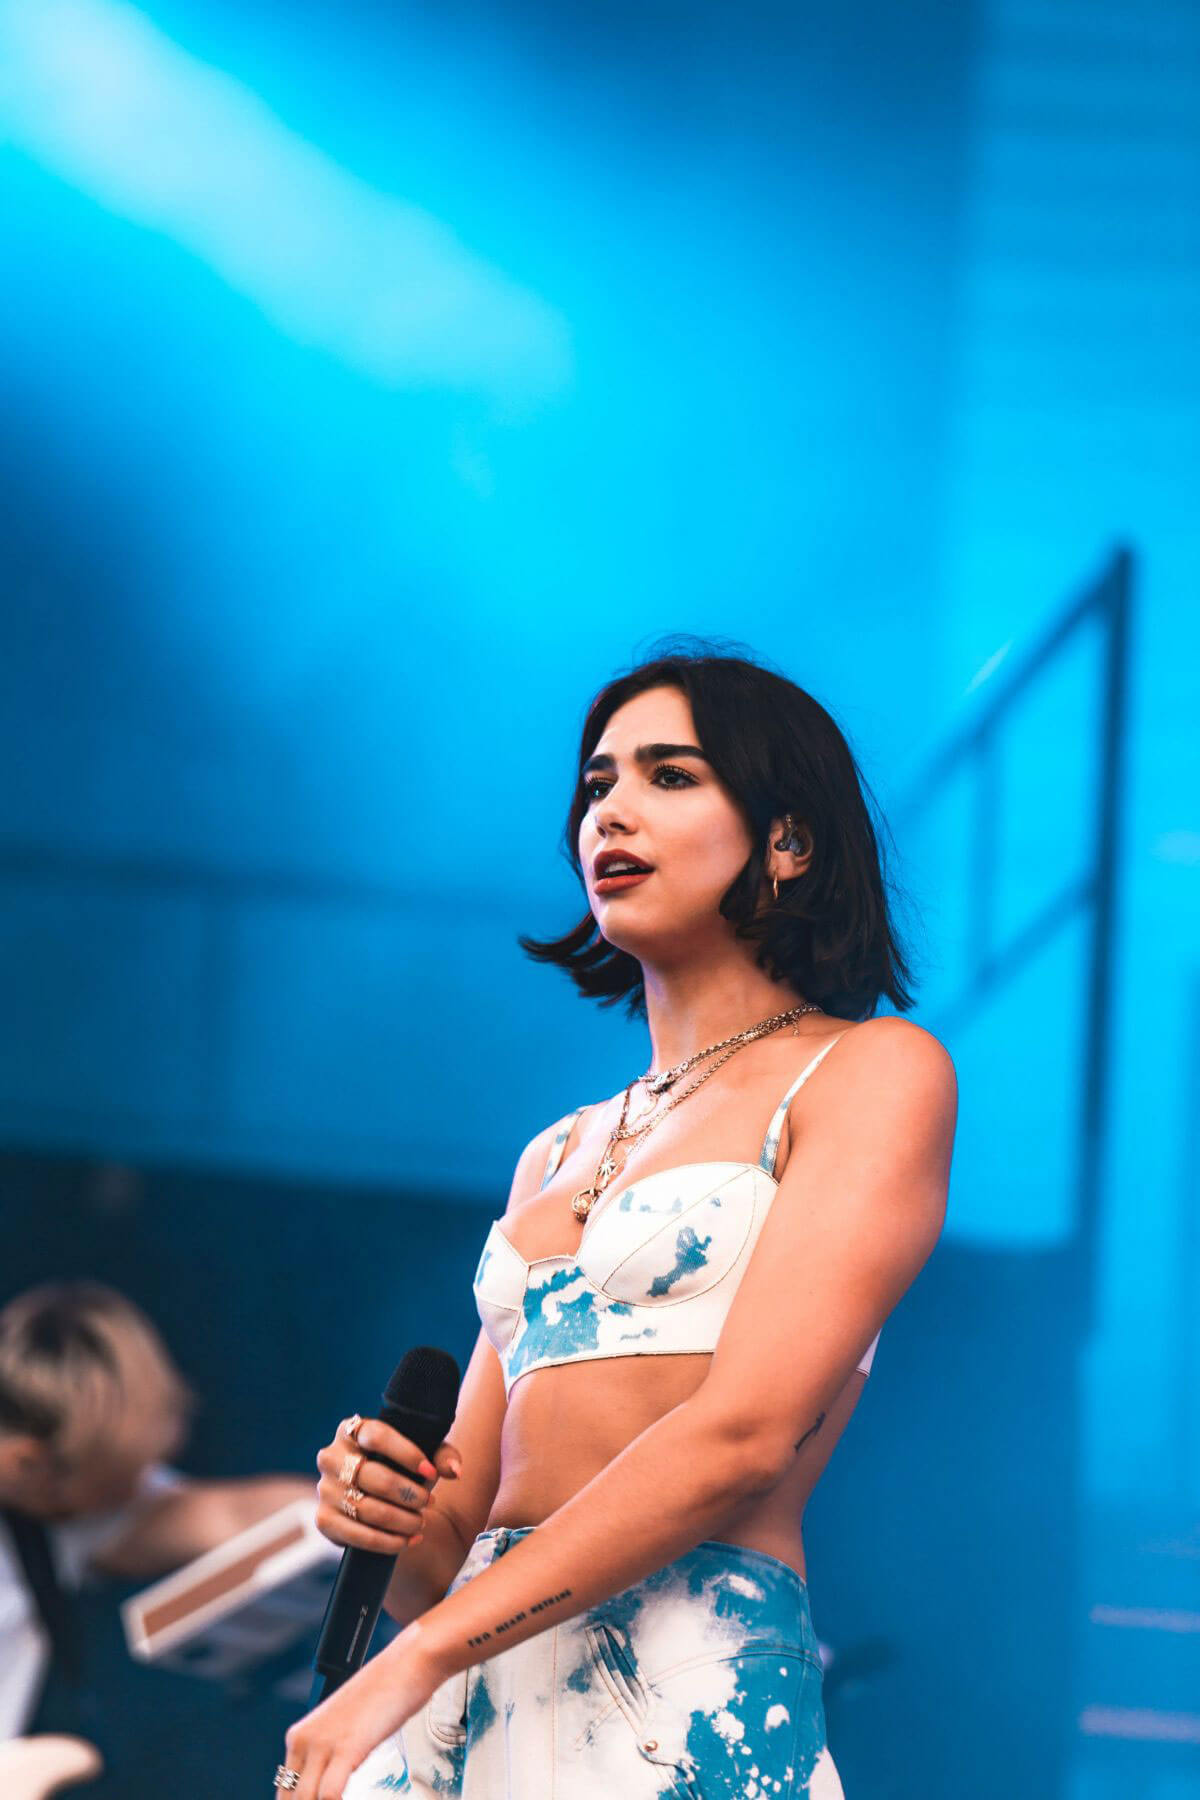 Dua Lipa Performs at Bonnaroo Music and Arts Festival in Manchester 2018/06/10